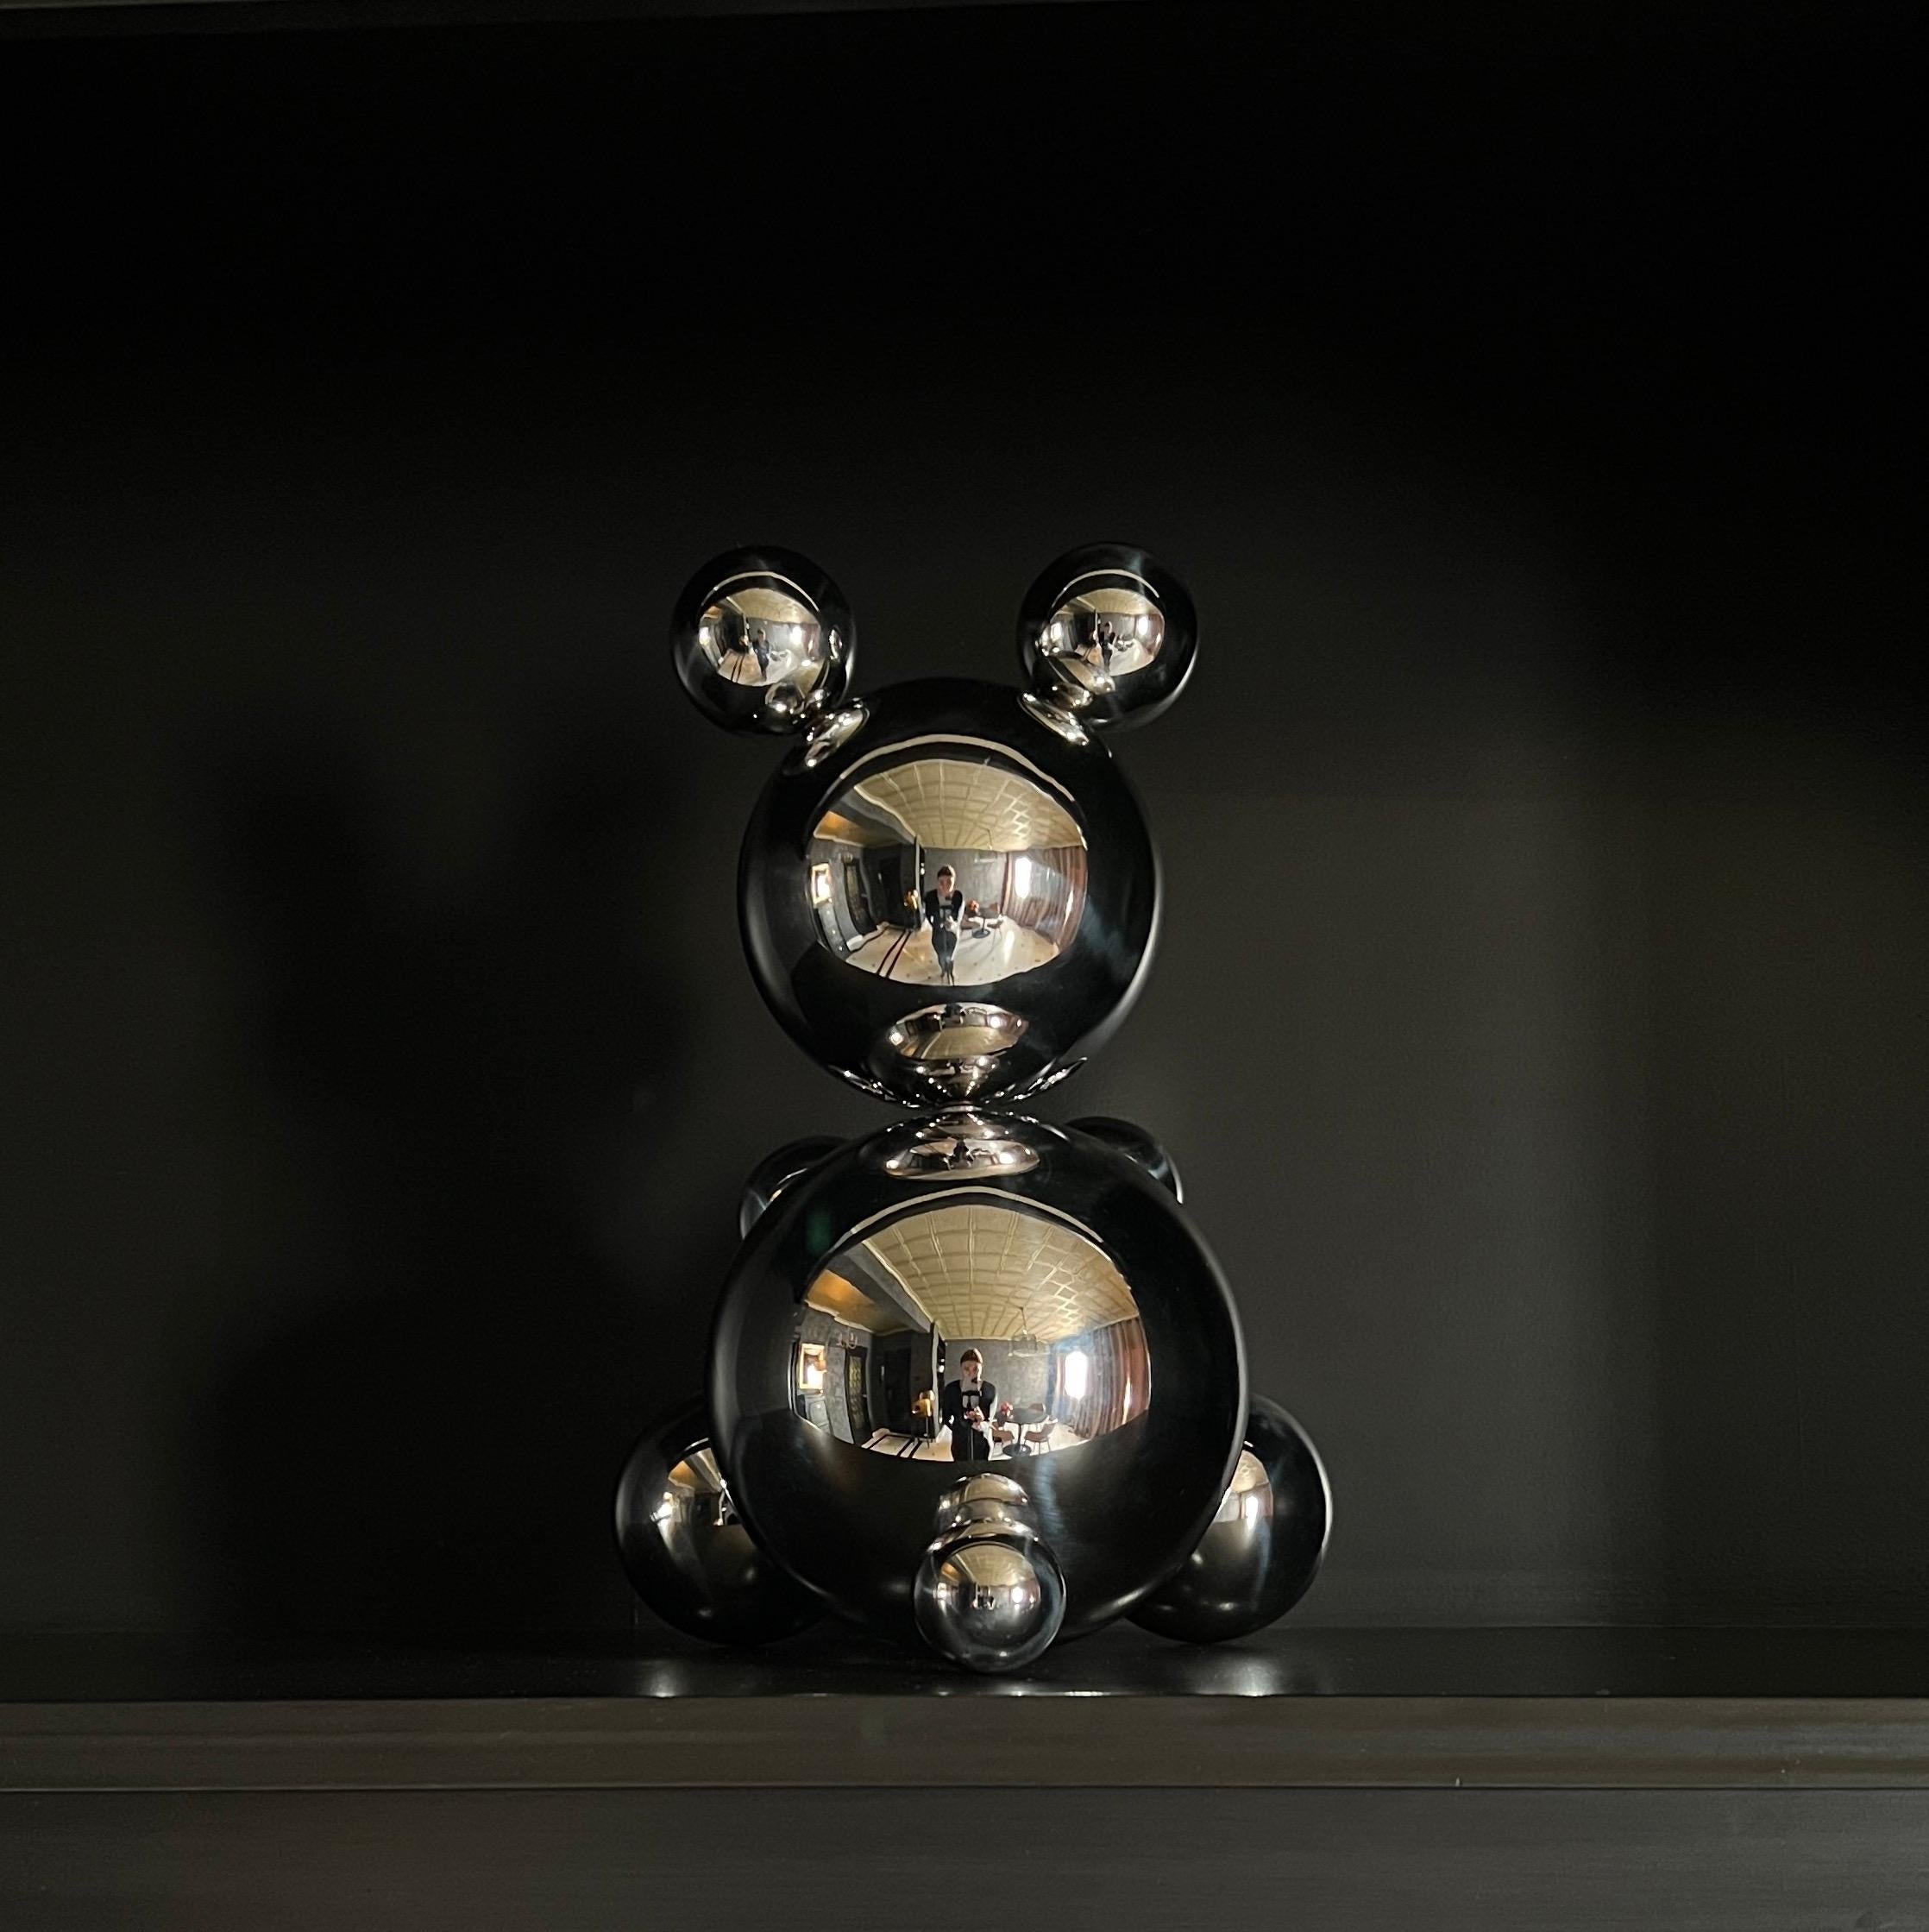 Middle Stainless Steel Bear 'Oliver' Sculpture Minimalistic Animal 2